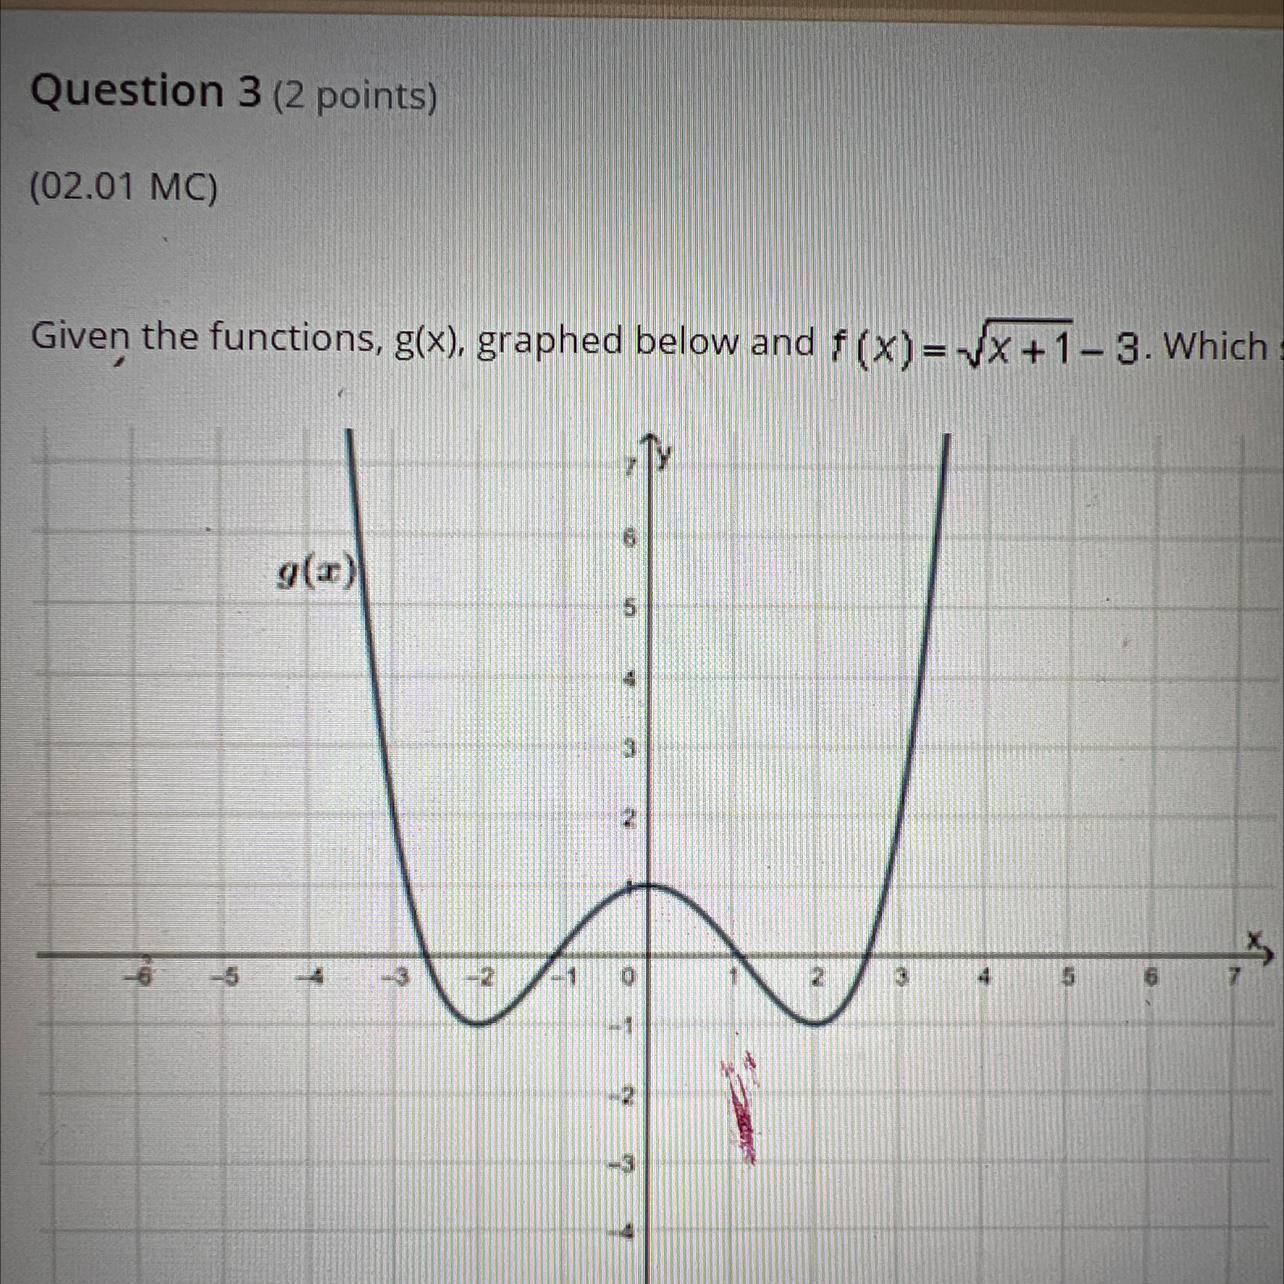 Given The Functions, G(x) Graphed Below And F(x)=x+1-3. Which Statement About The Functions Is True?Only